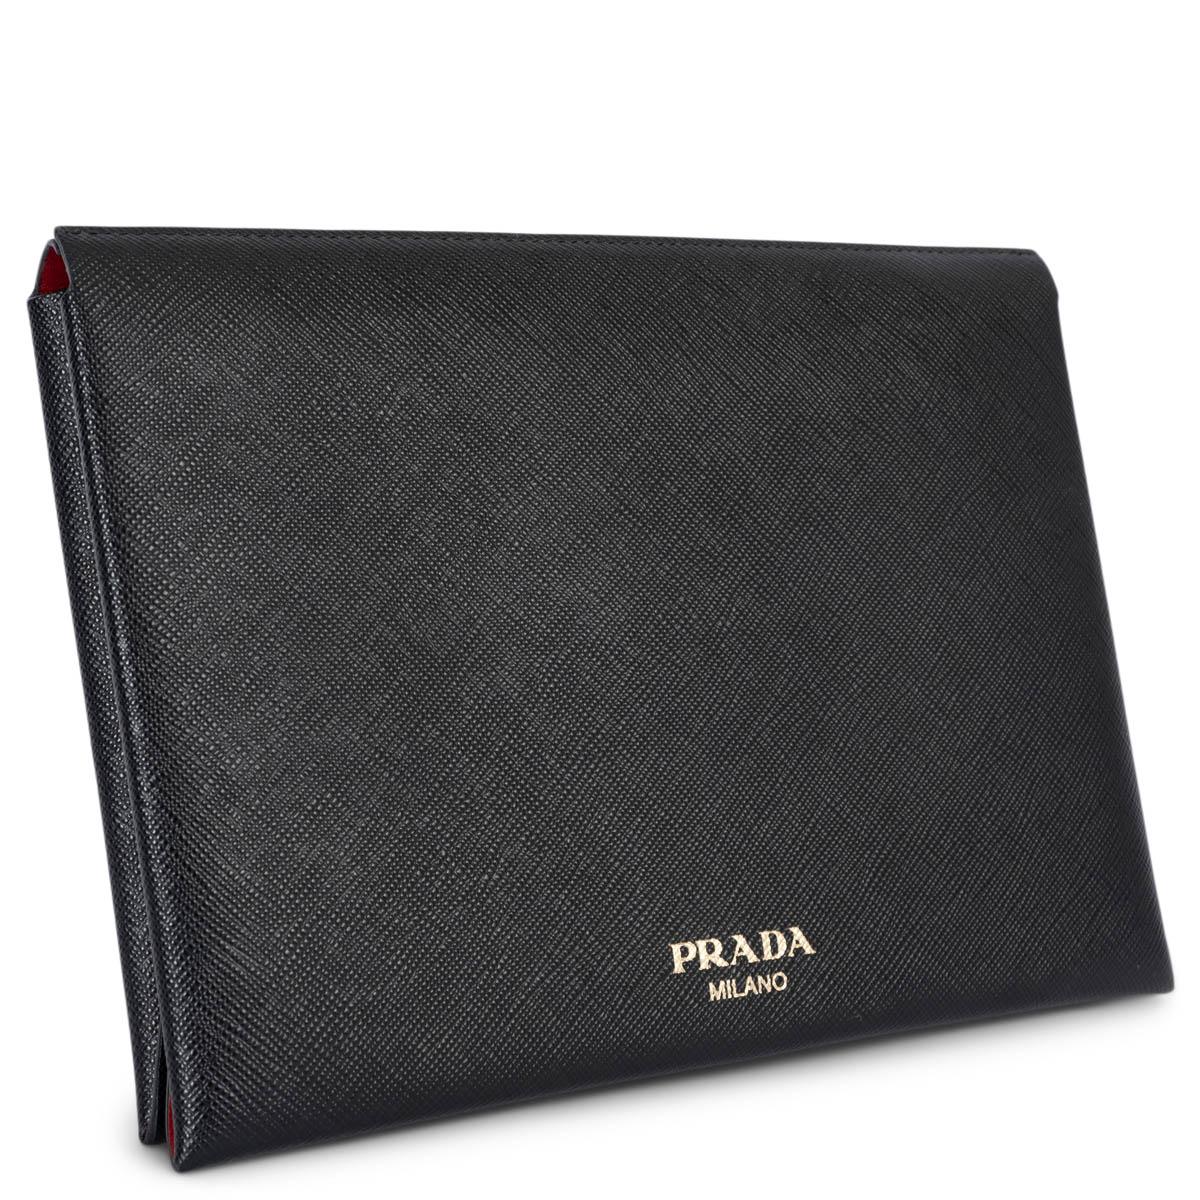 100% authentic Prada small document portfolio envelope pouch in black Saffiano leather. Opens with a push-button and is lined in red Saffiano leather and calfskin. The inside features a removable Fuoco red zipper pouch tucked inside and a large card